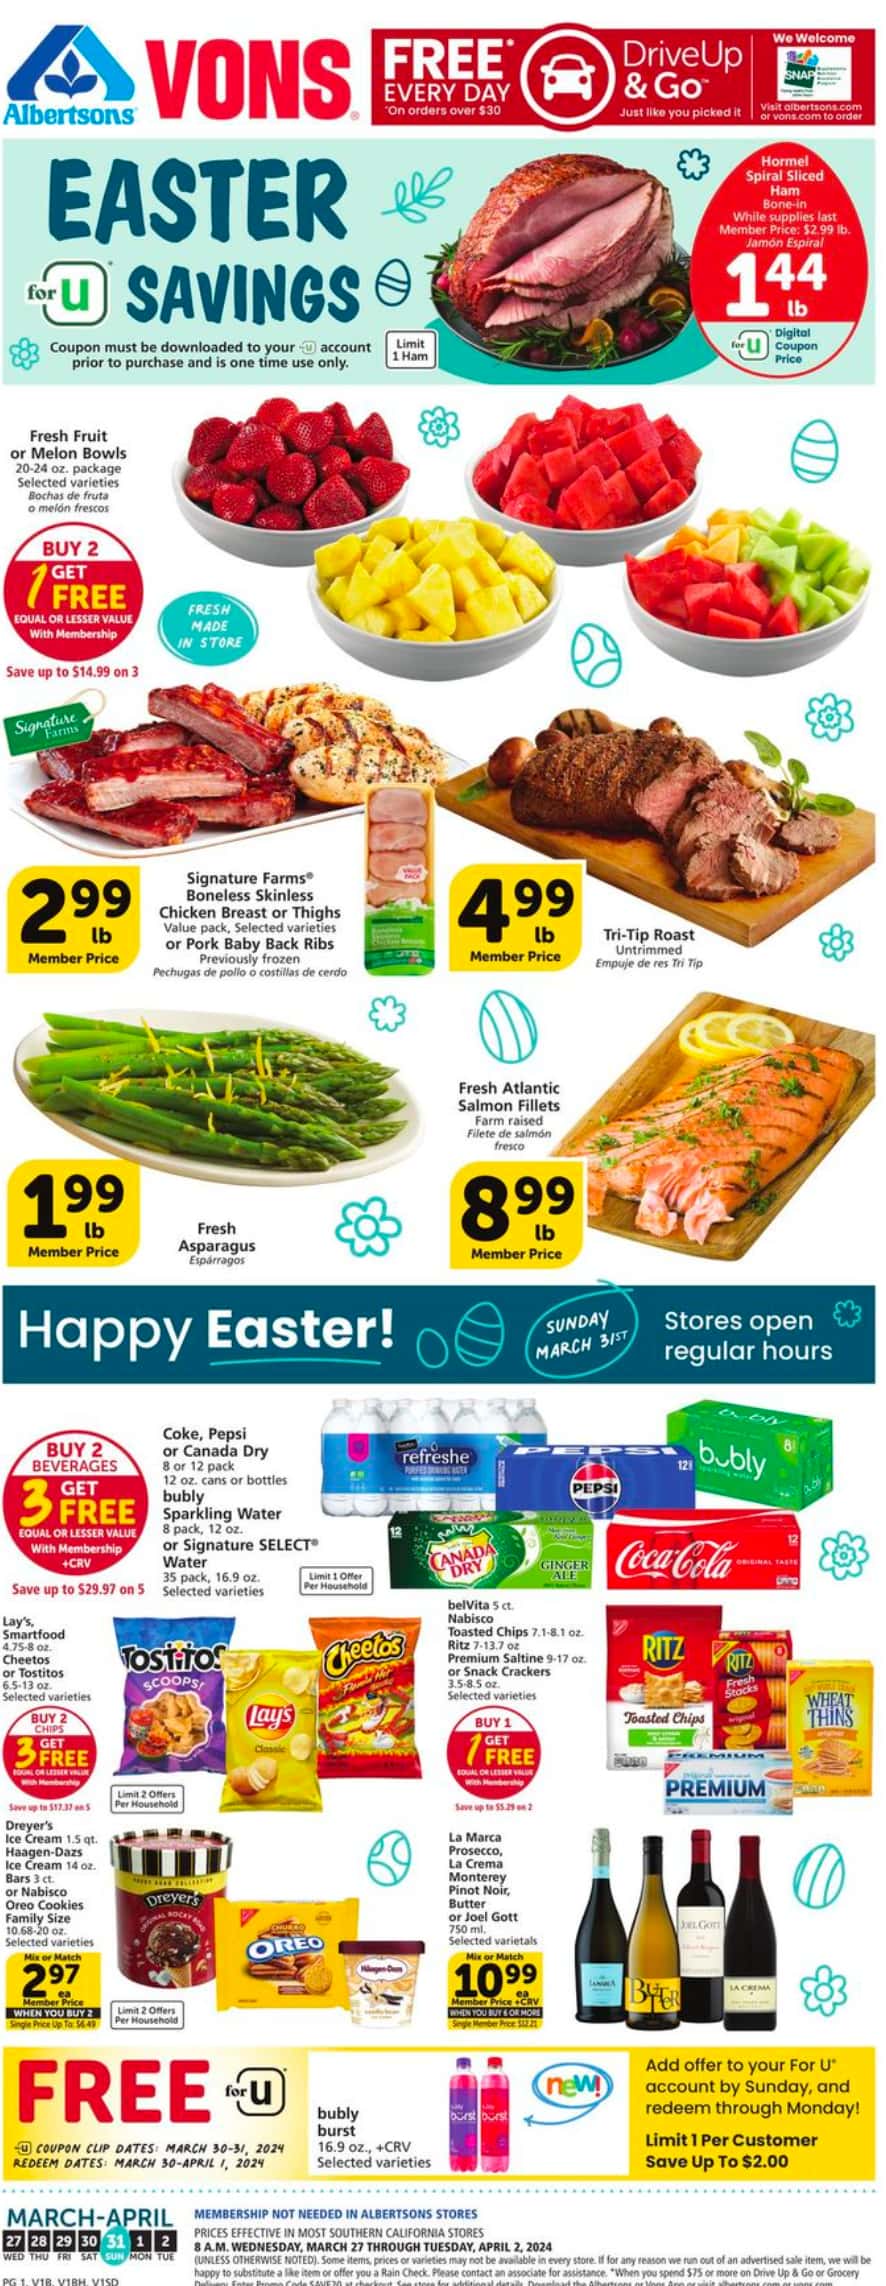 Vons_weekly_ad_032724_01